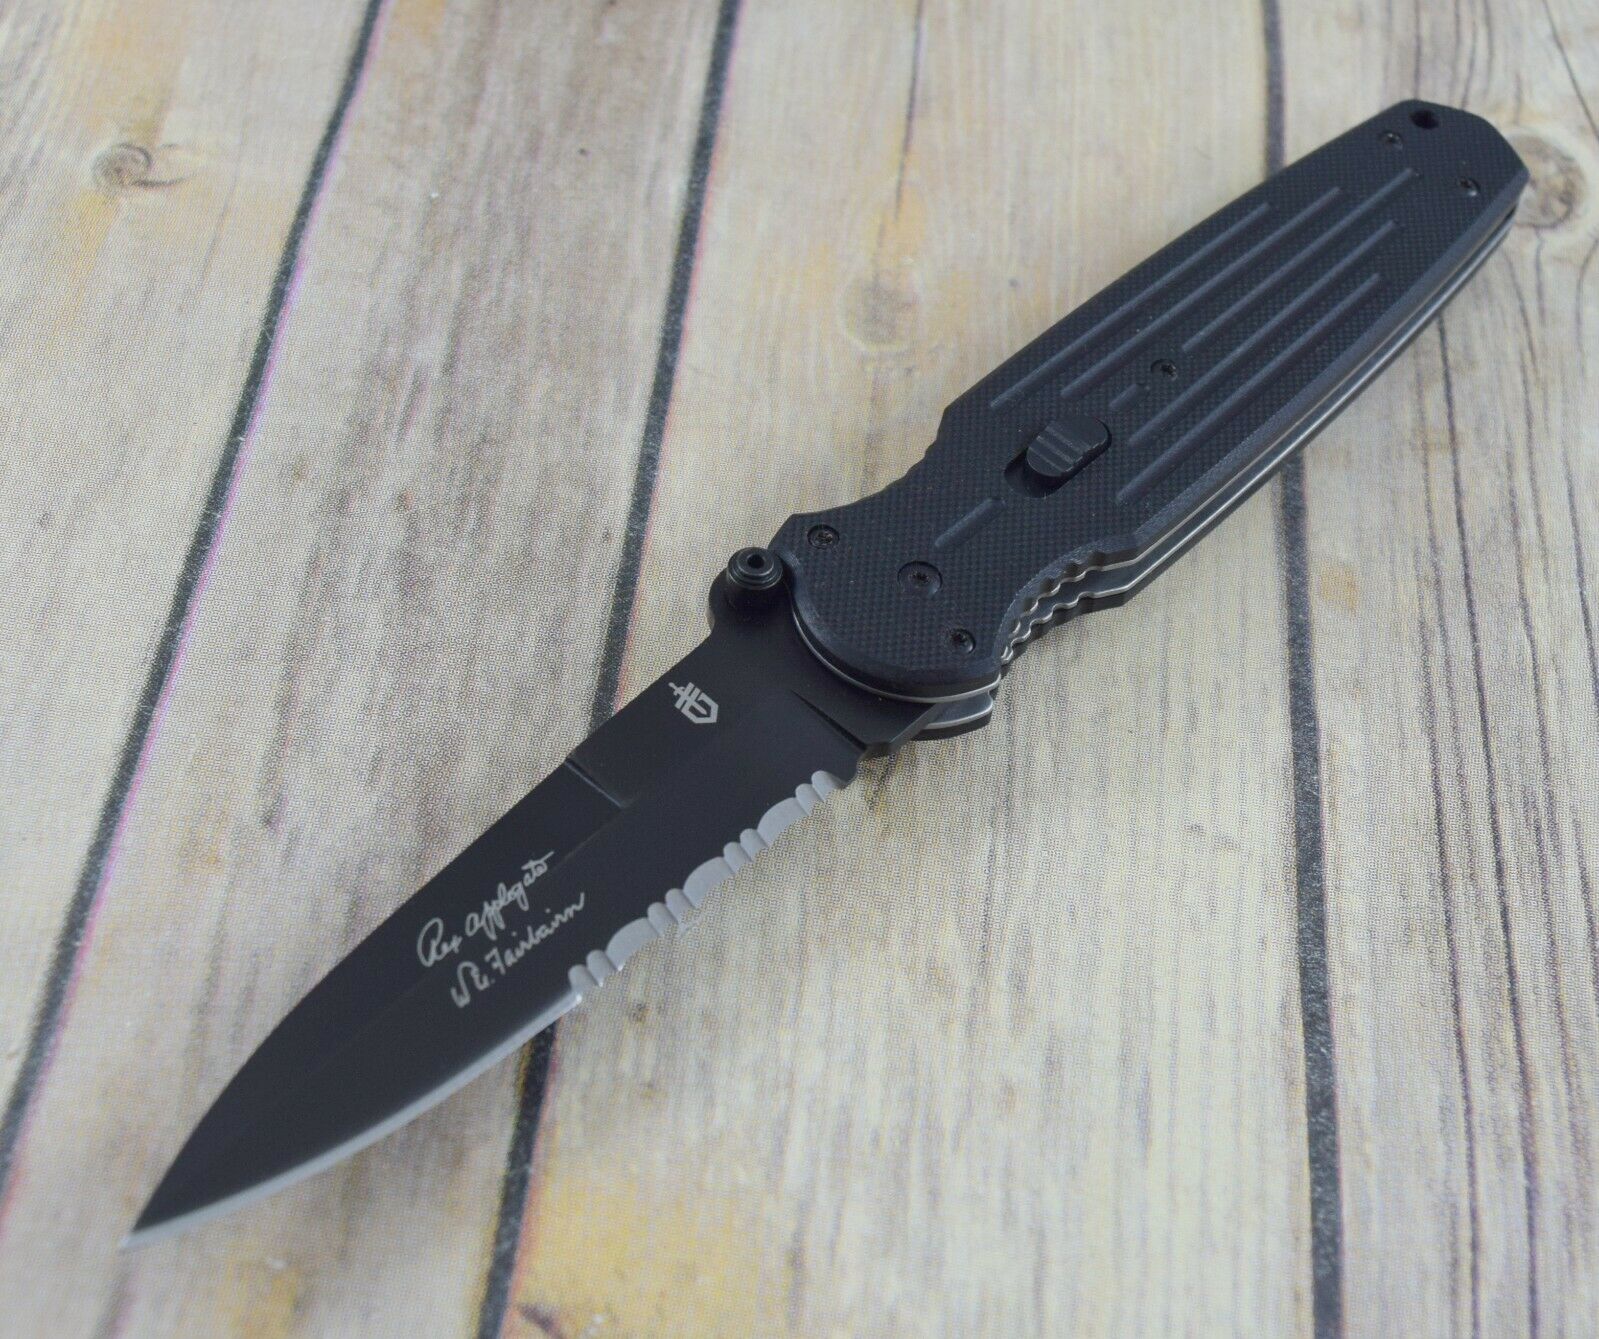 Gerber covert spring assisted